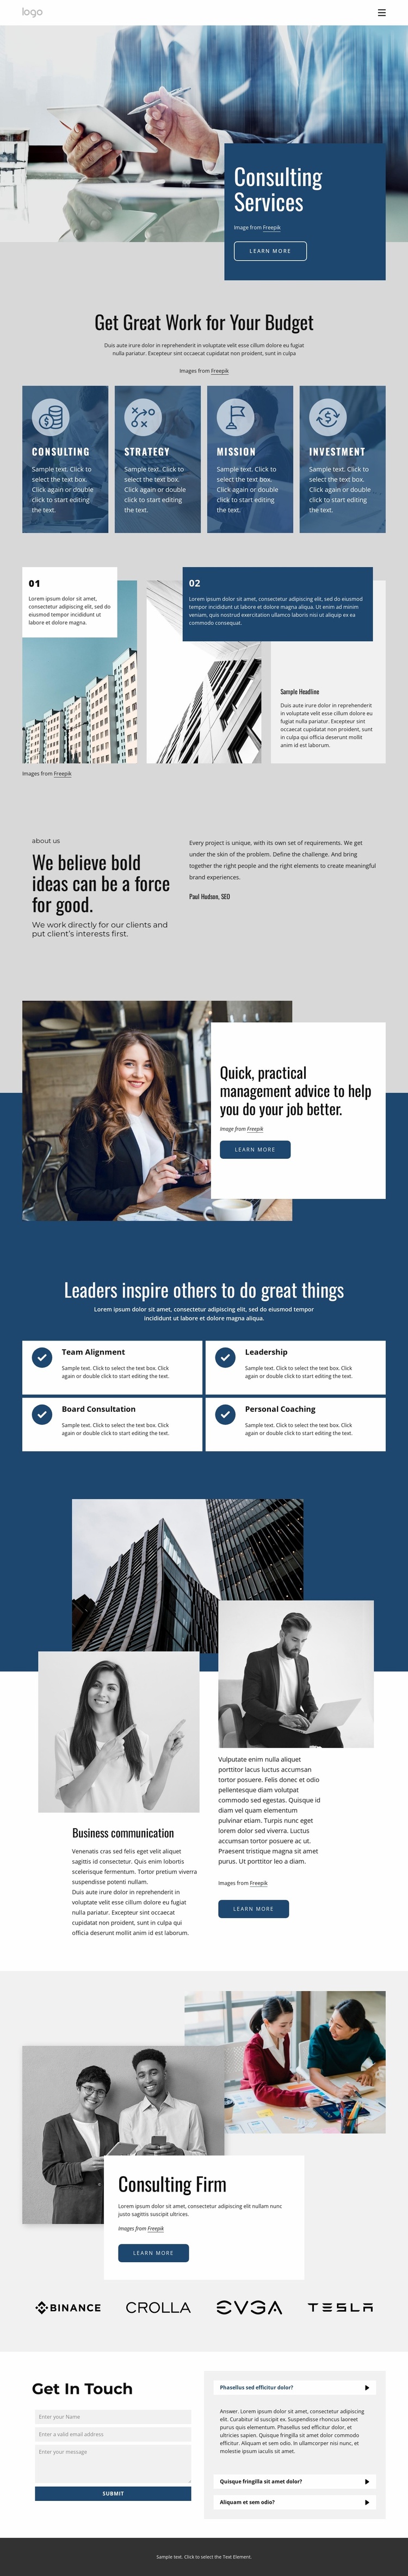 Professional consulting service firm Website Template